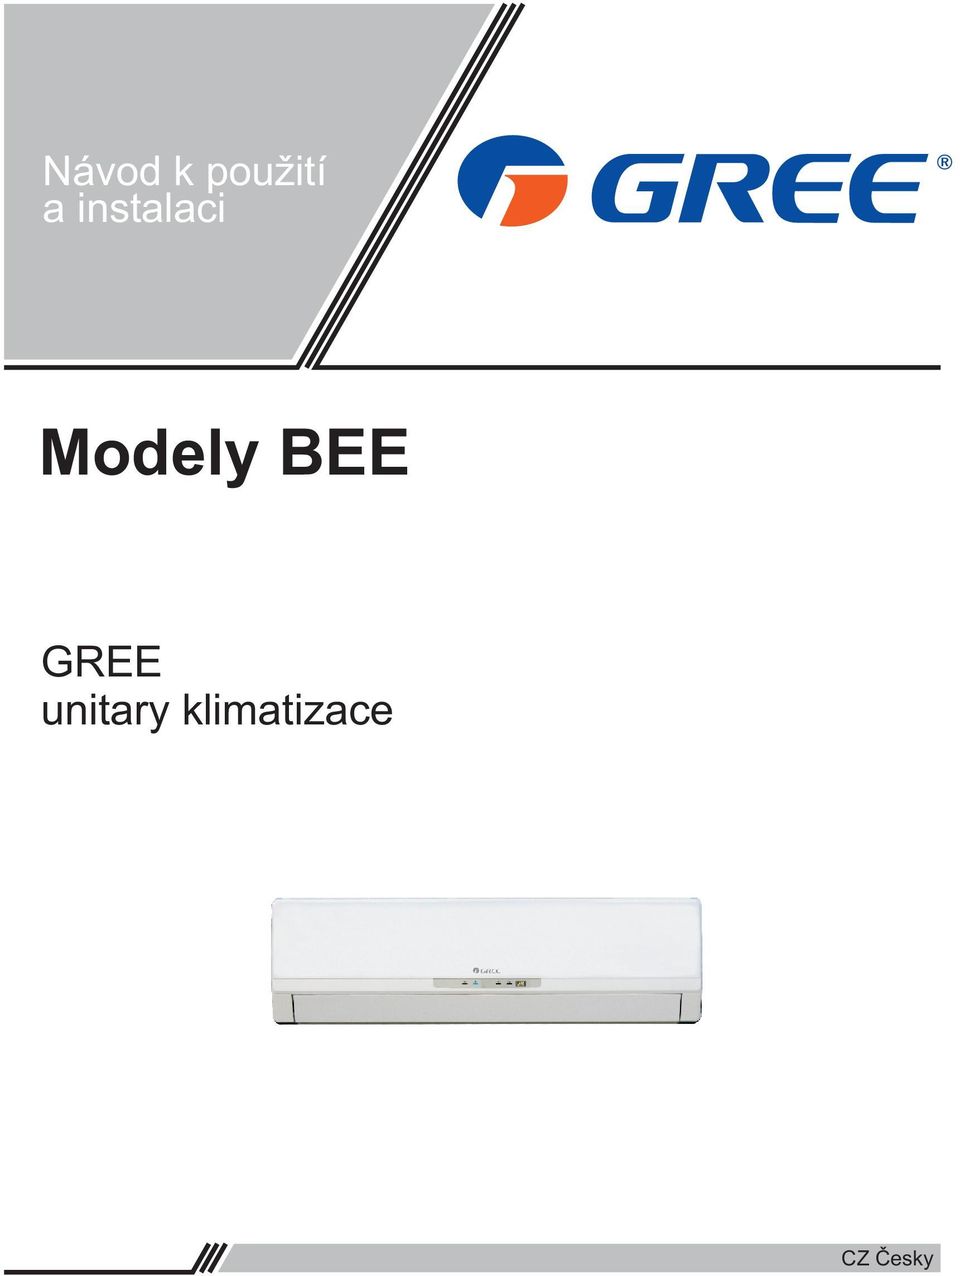 Modely BEE GREE